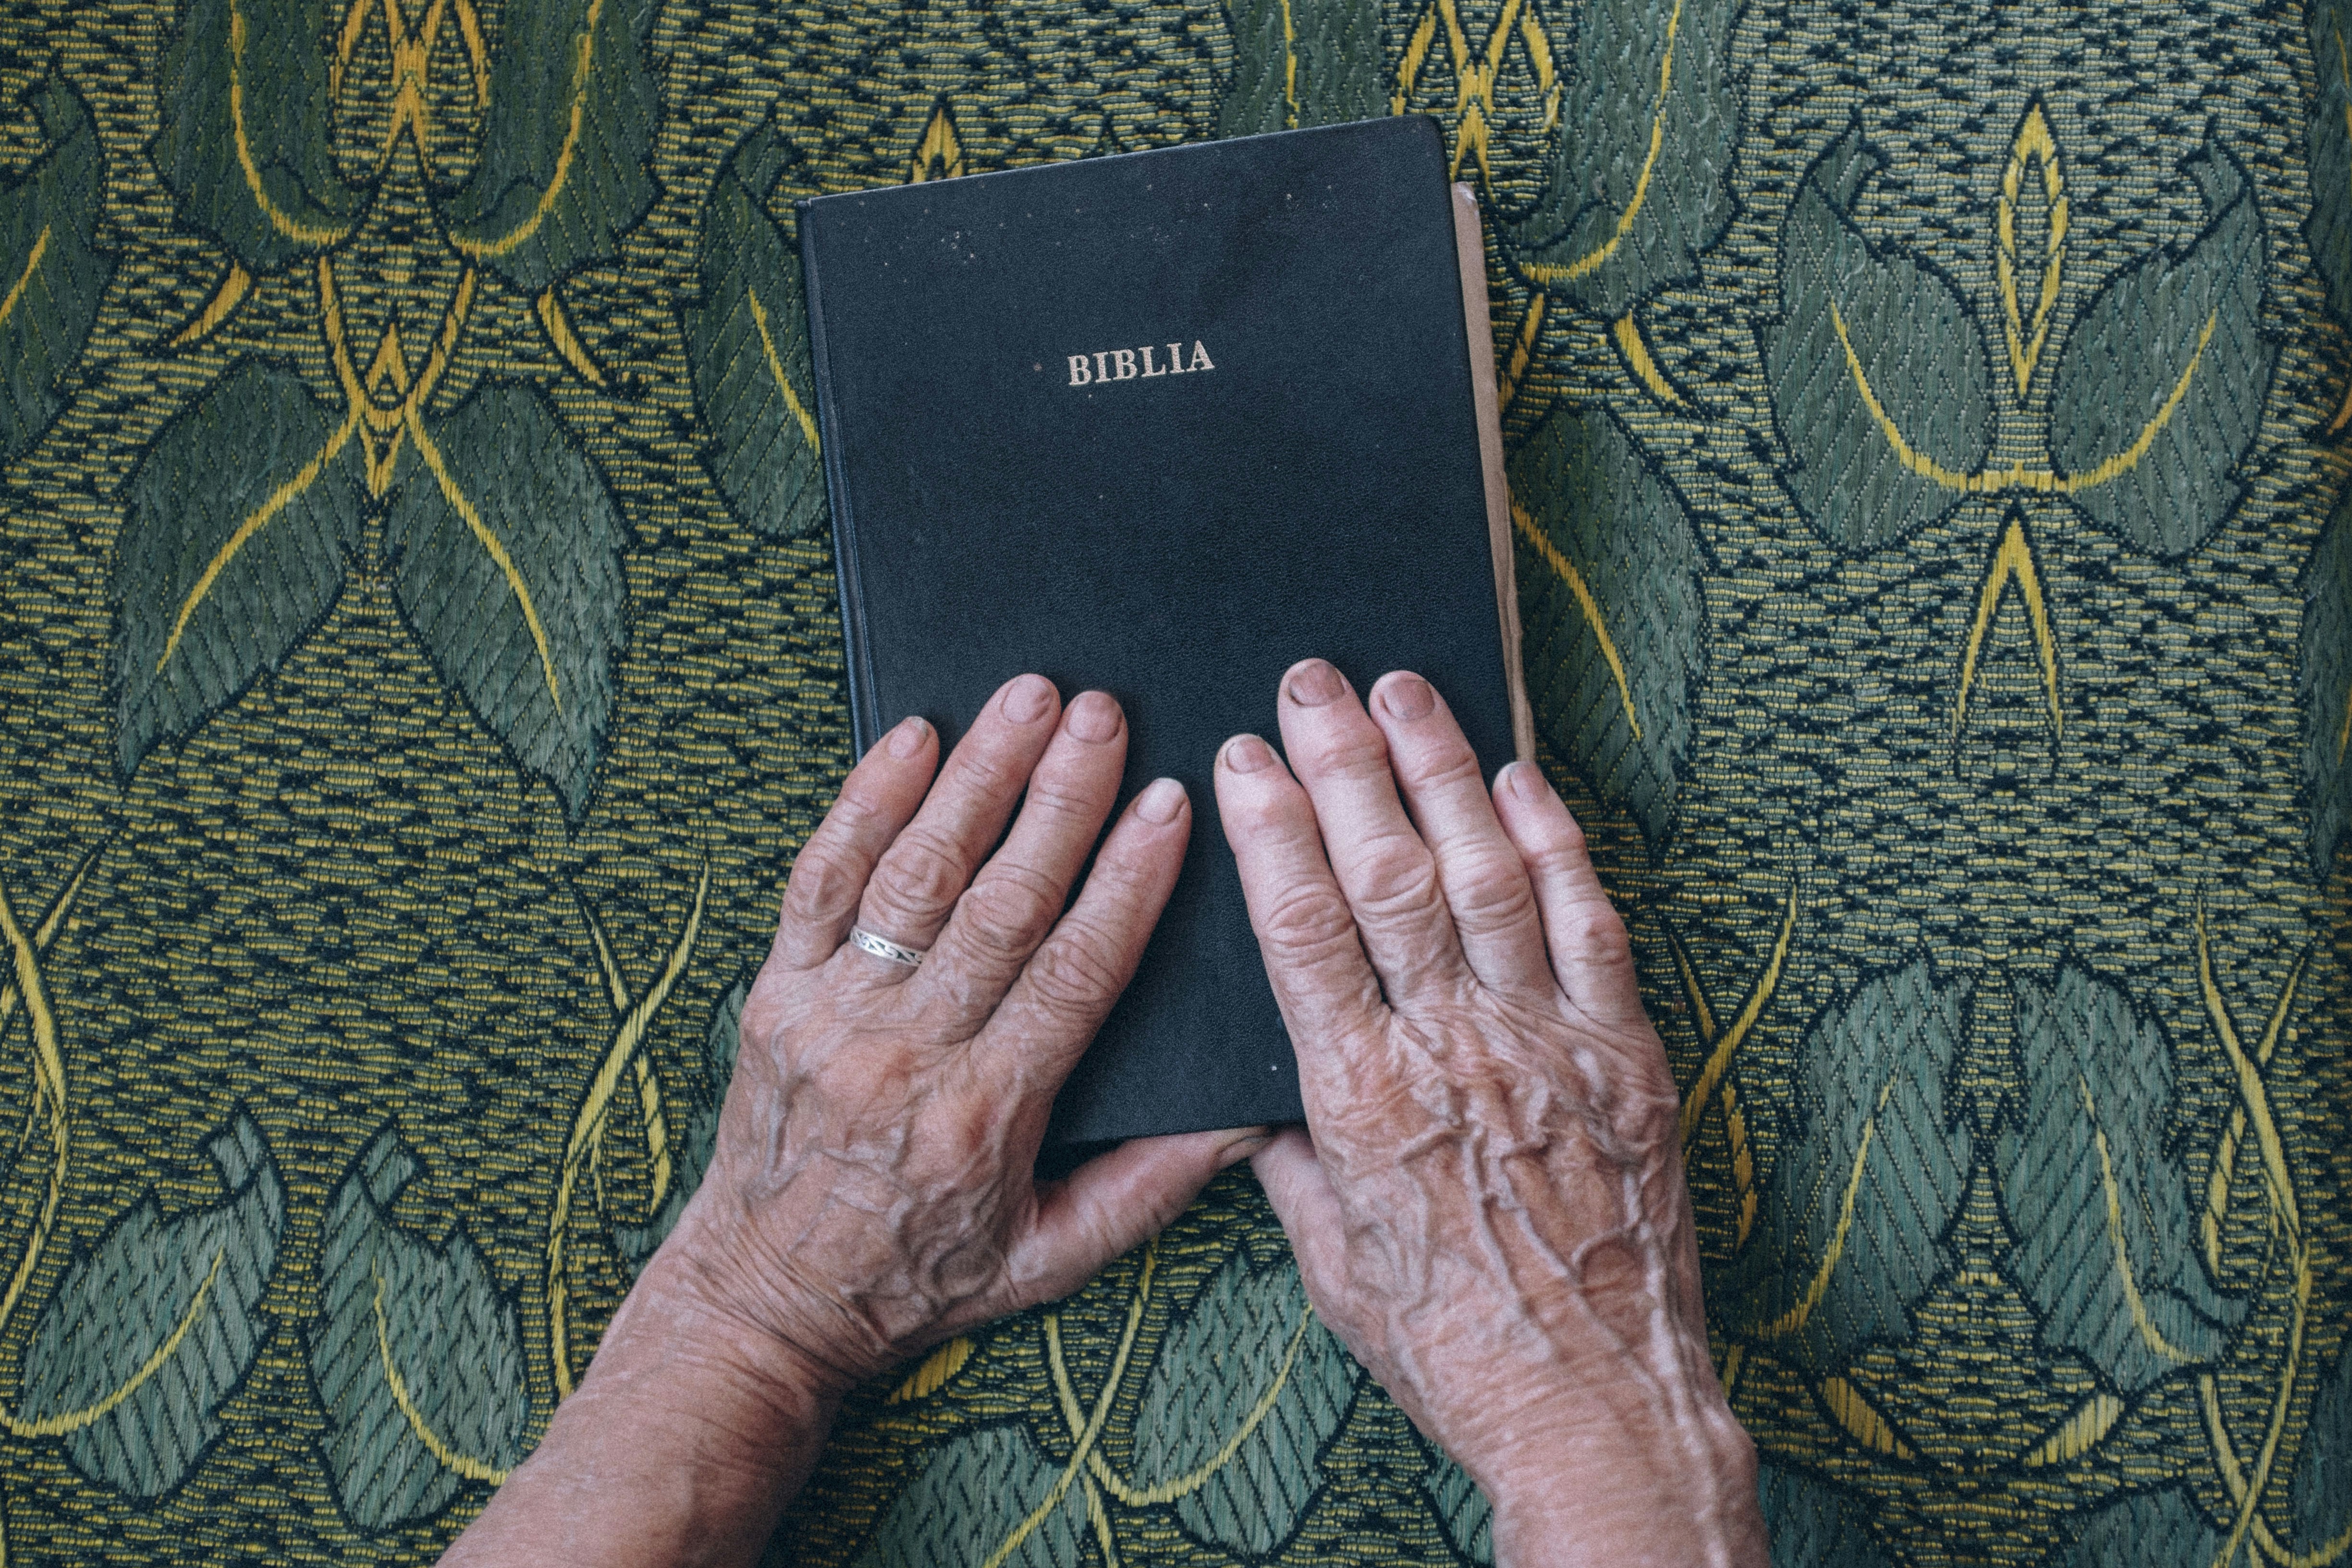 Two hands on a bible